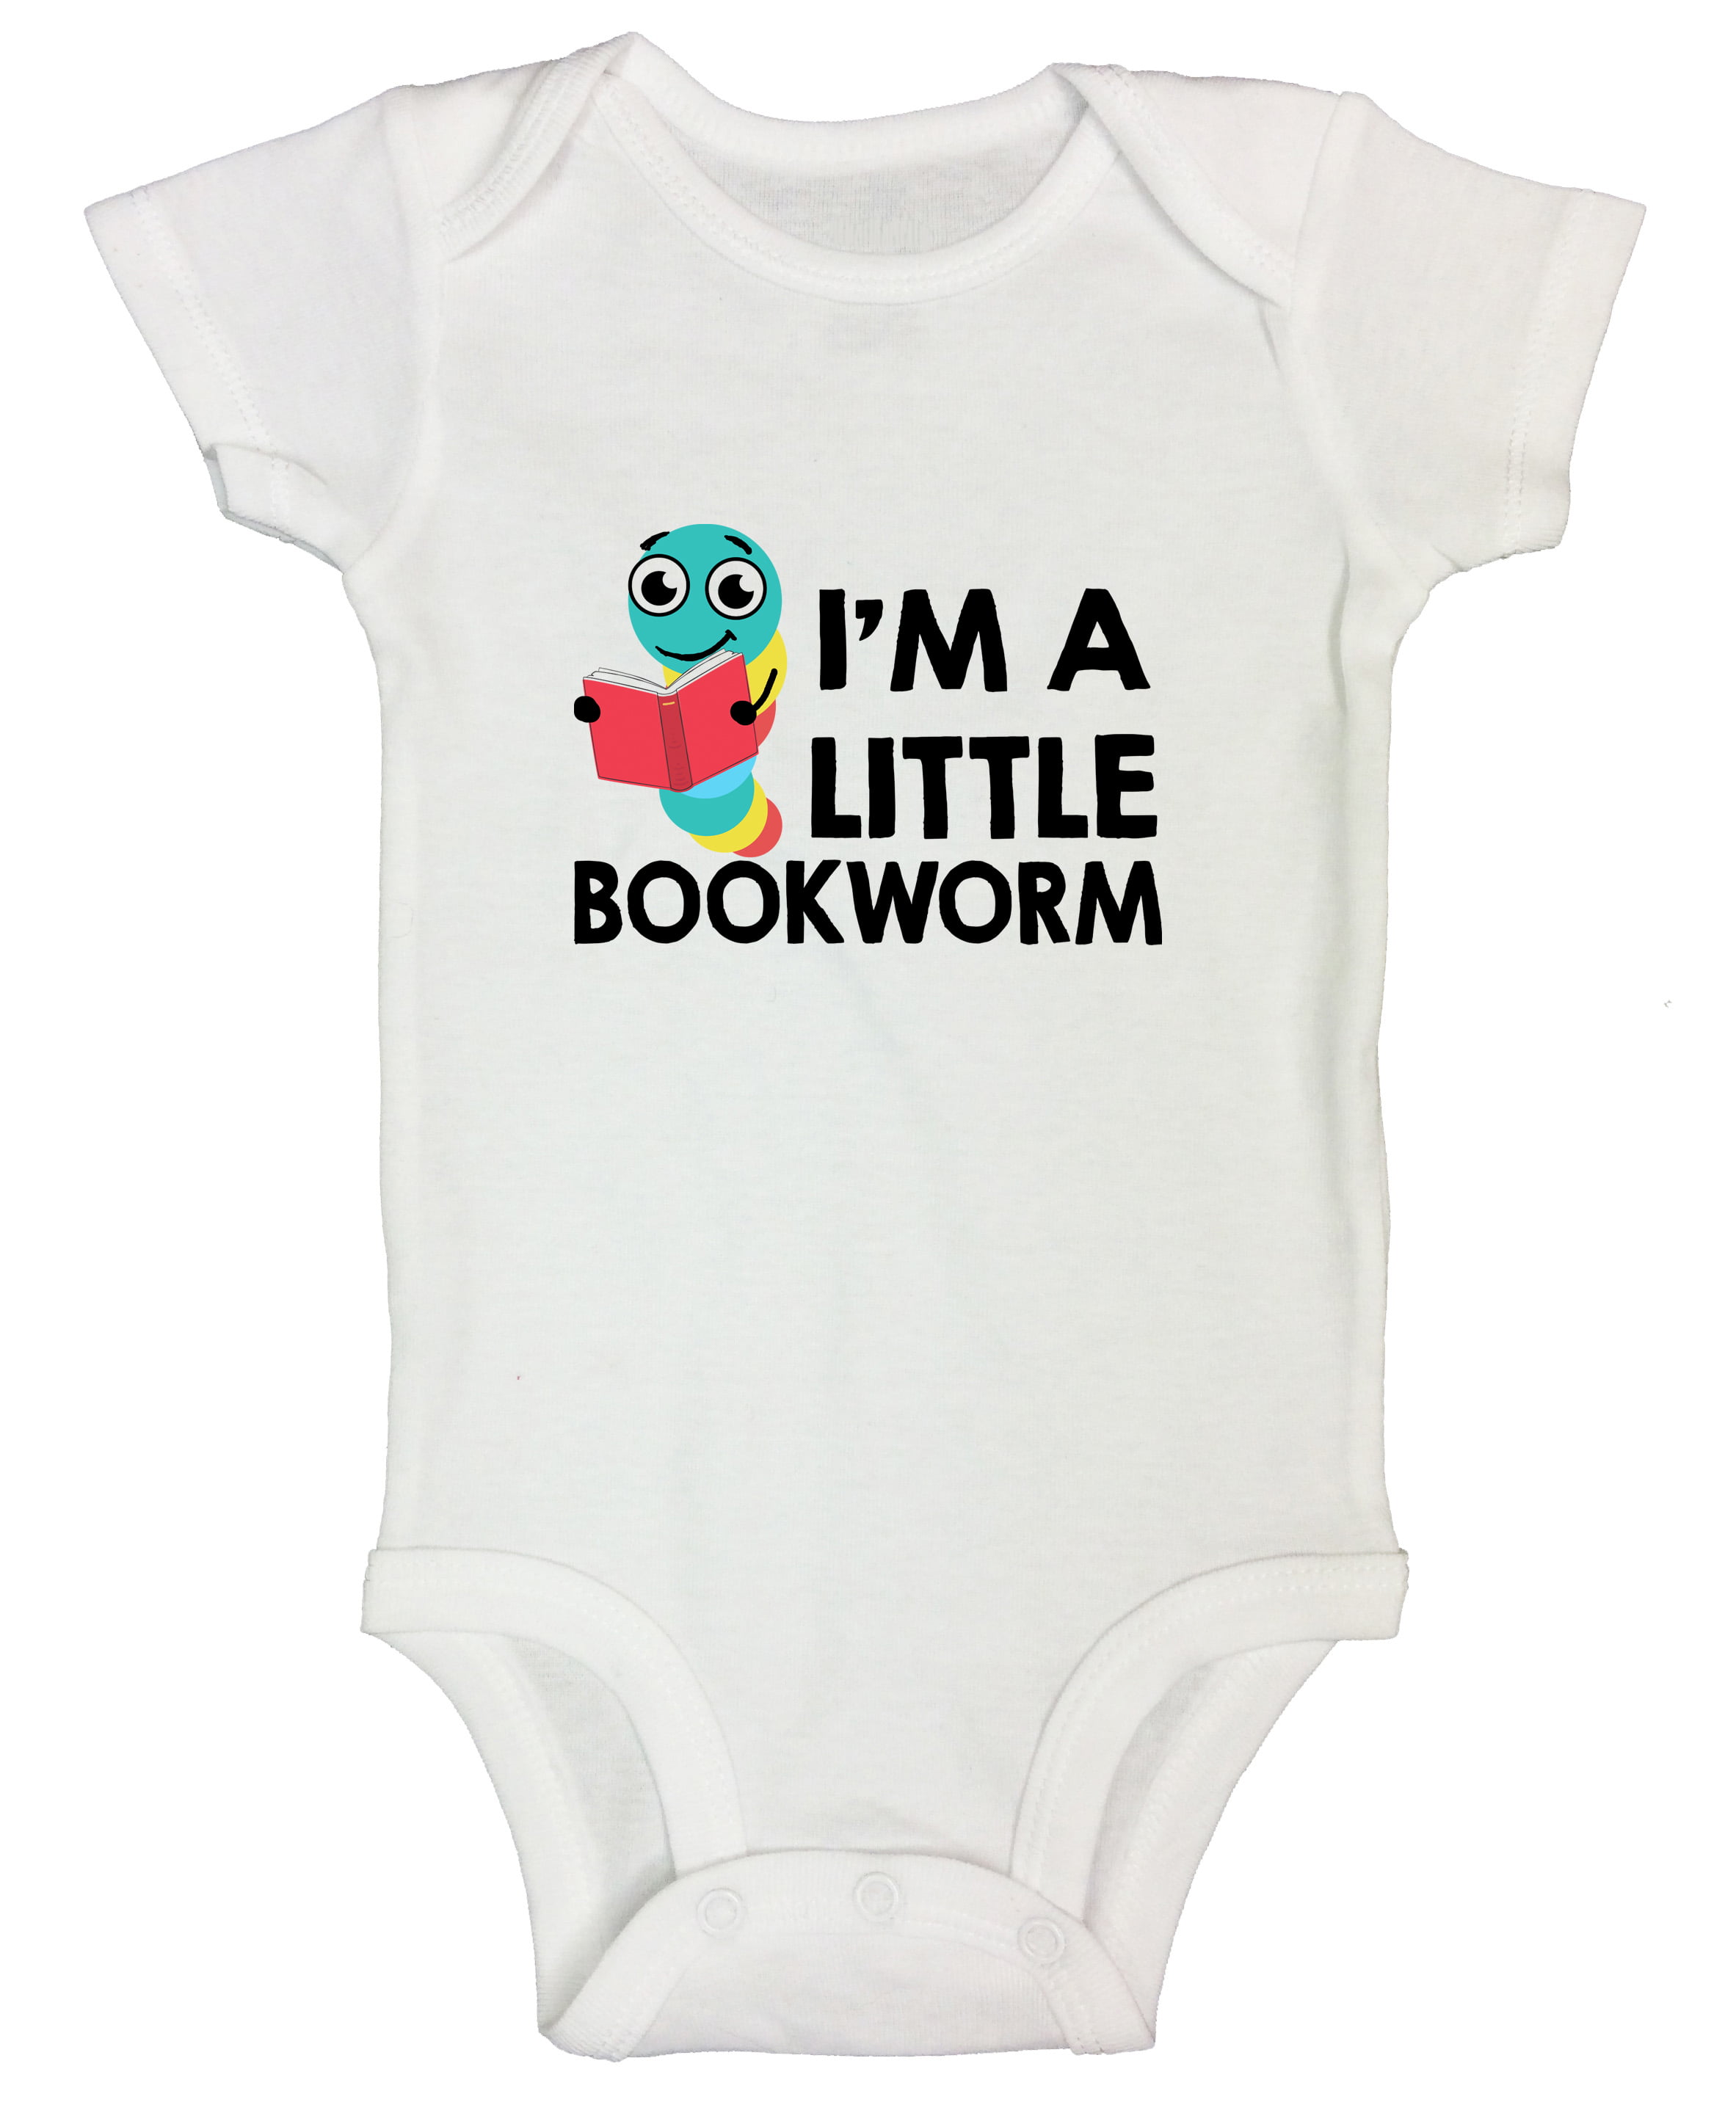 Details about   Infant creeper bodysuit romper t-shirt Are You Looking At Me Funny 